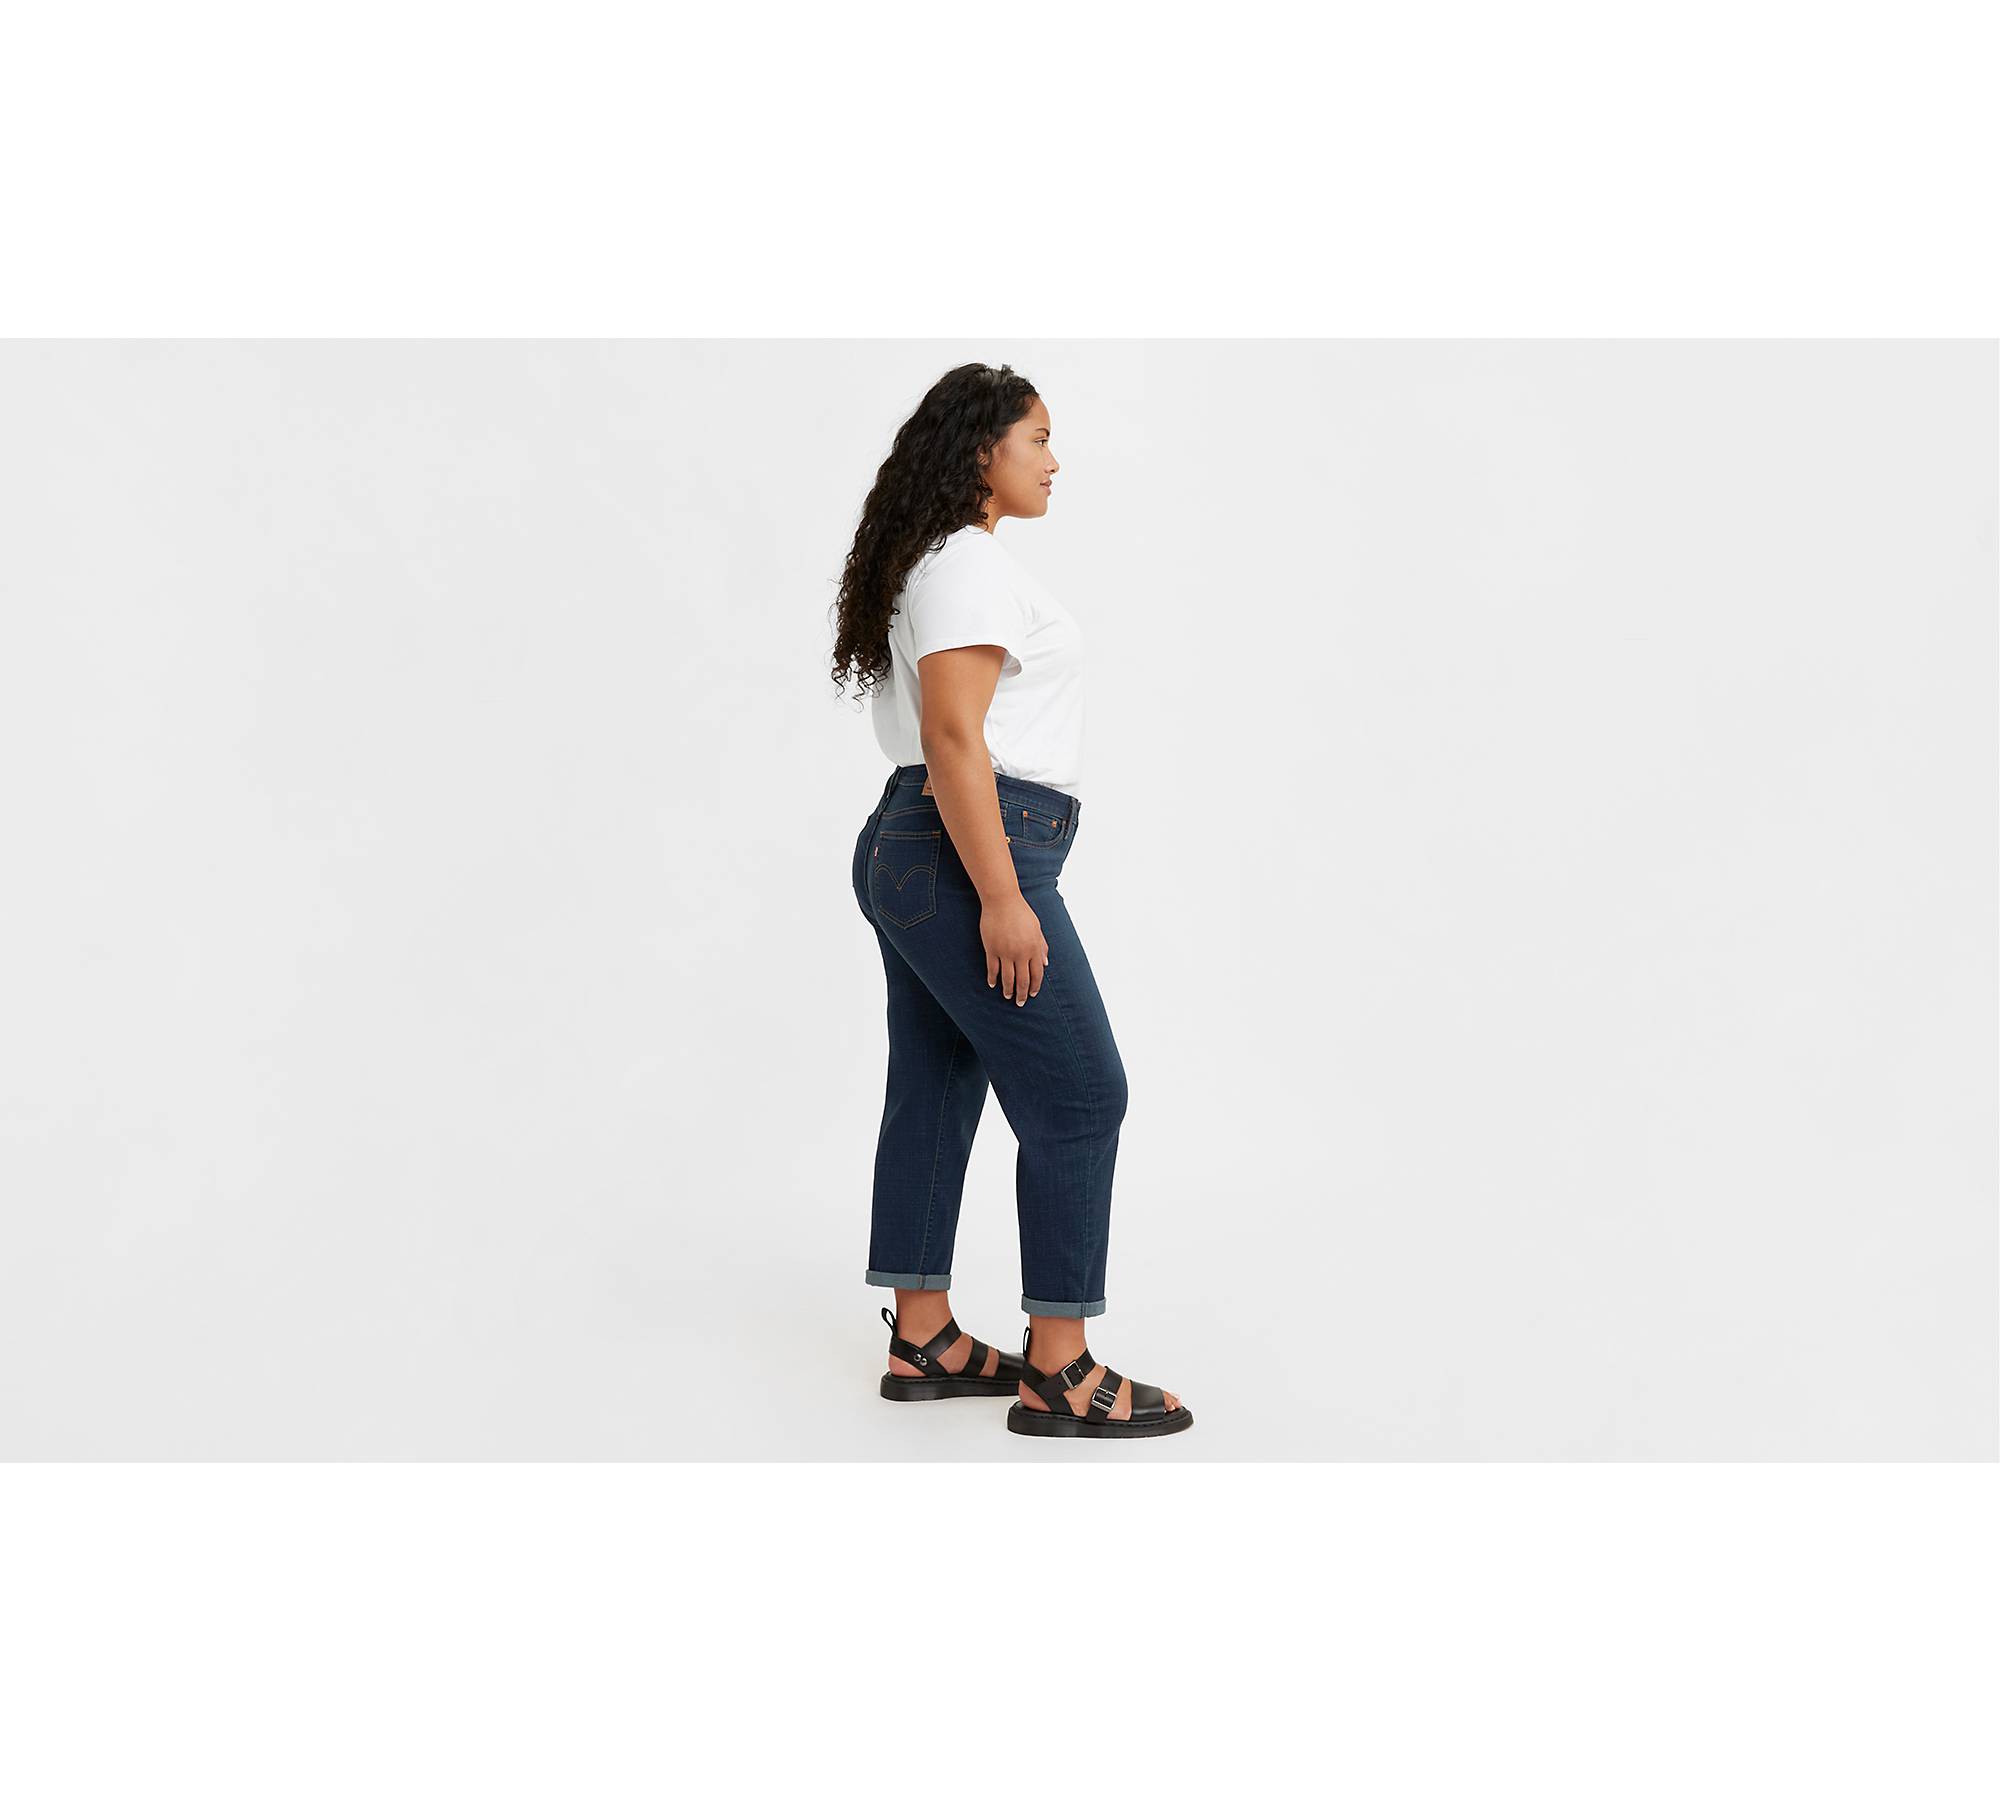 How to Alter a Size 18 Pants to a Size 8 (Weightloss Alterations) 